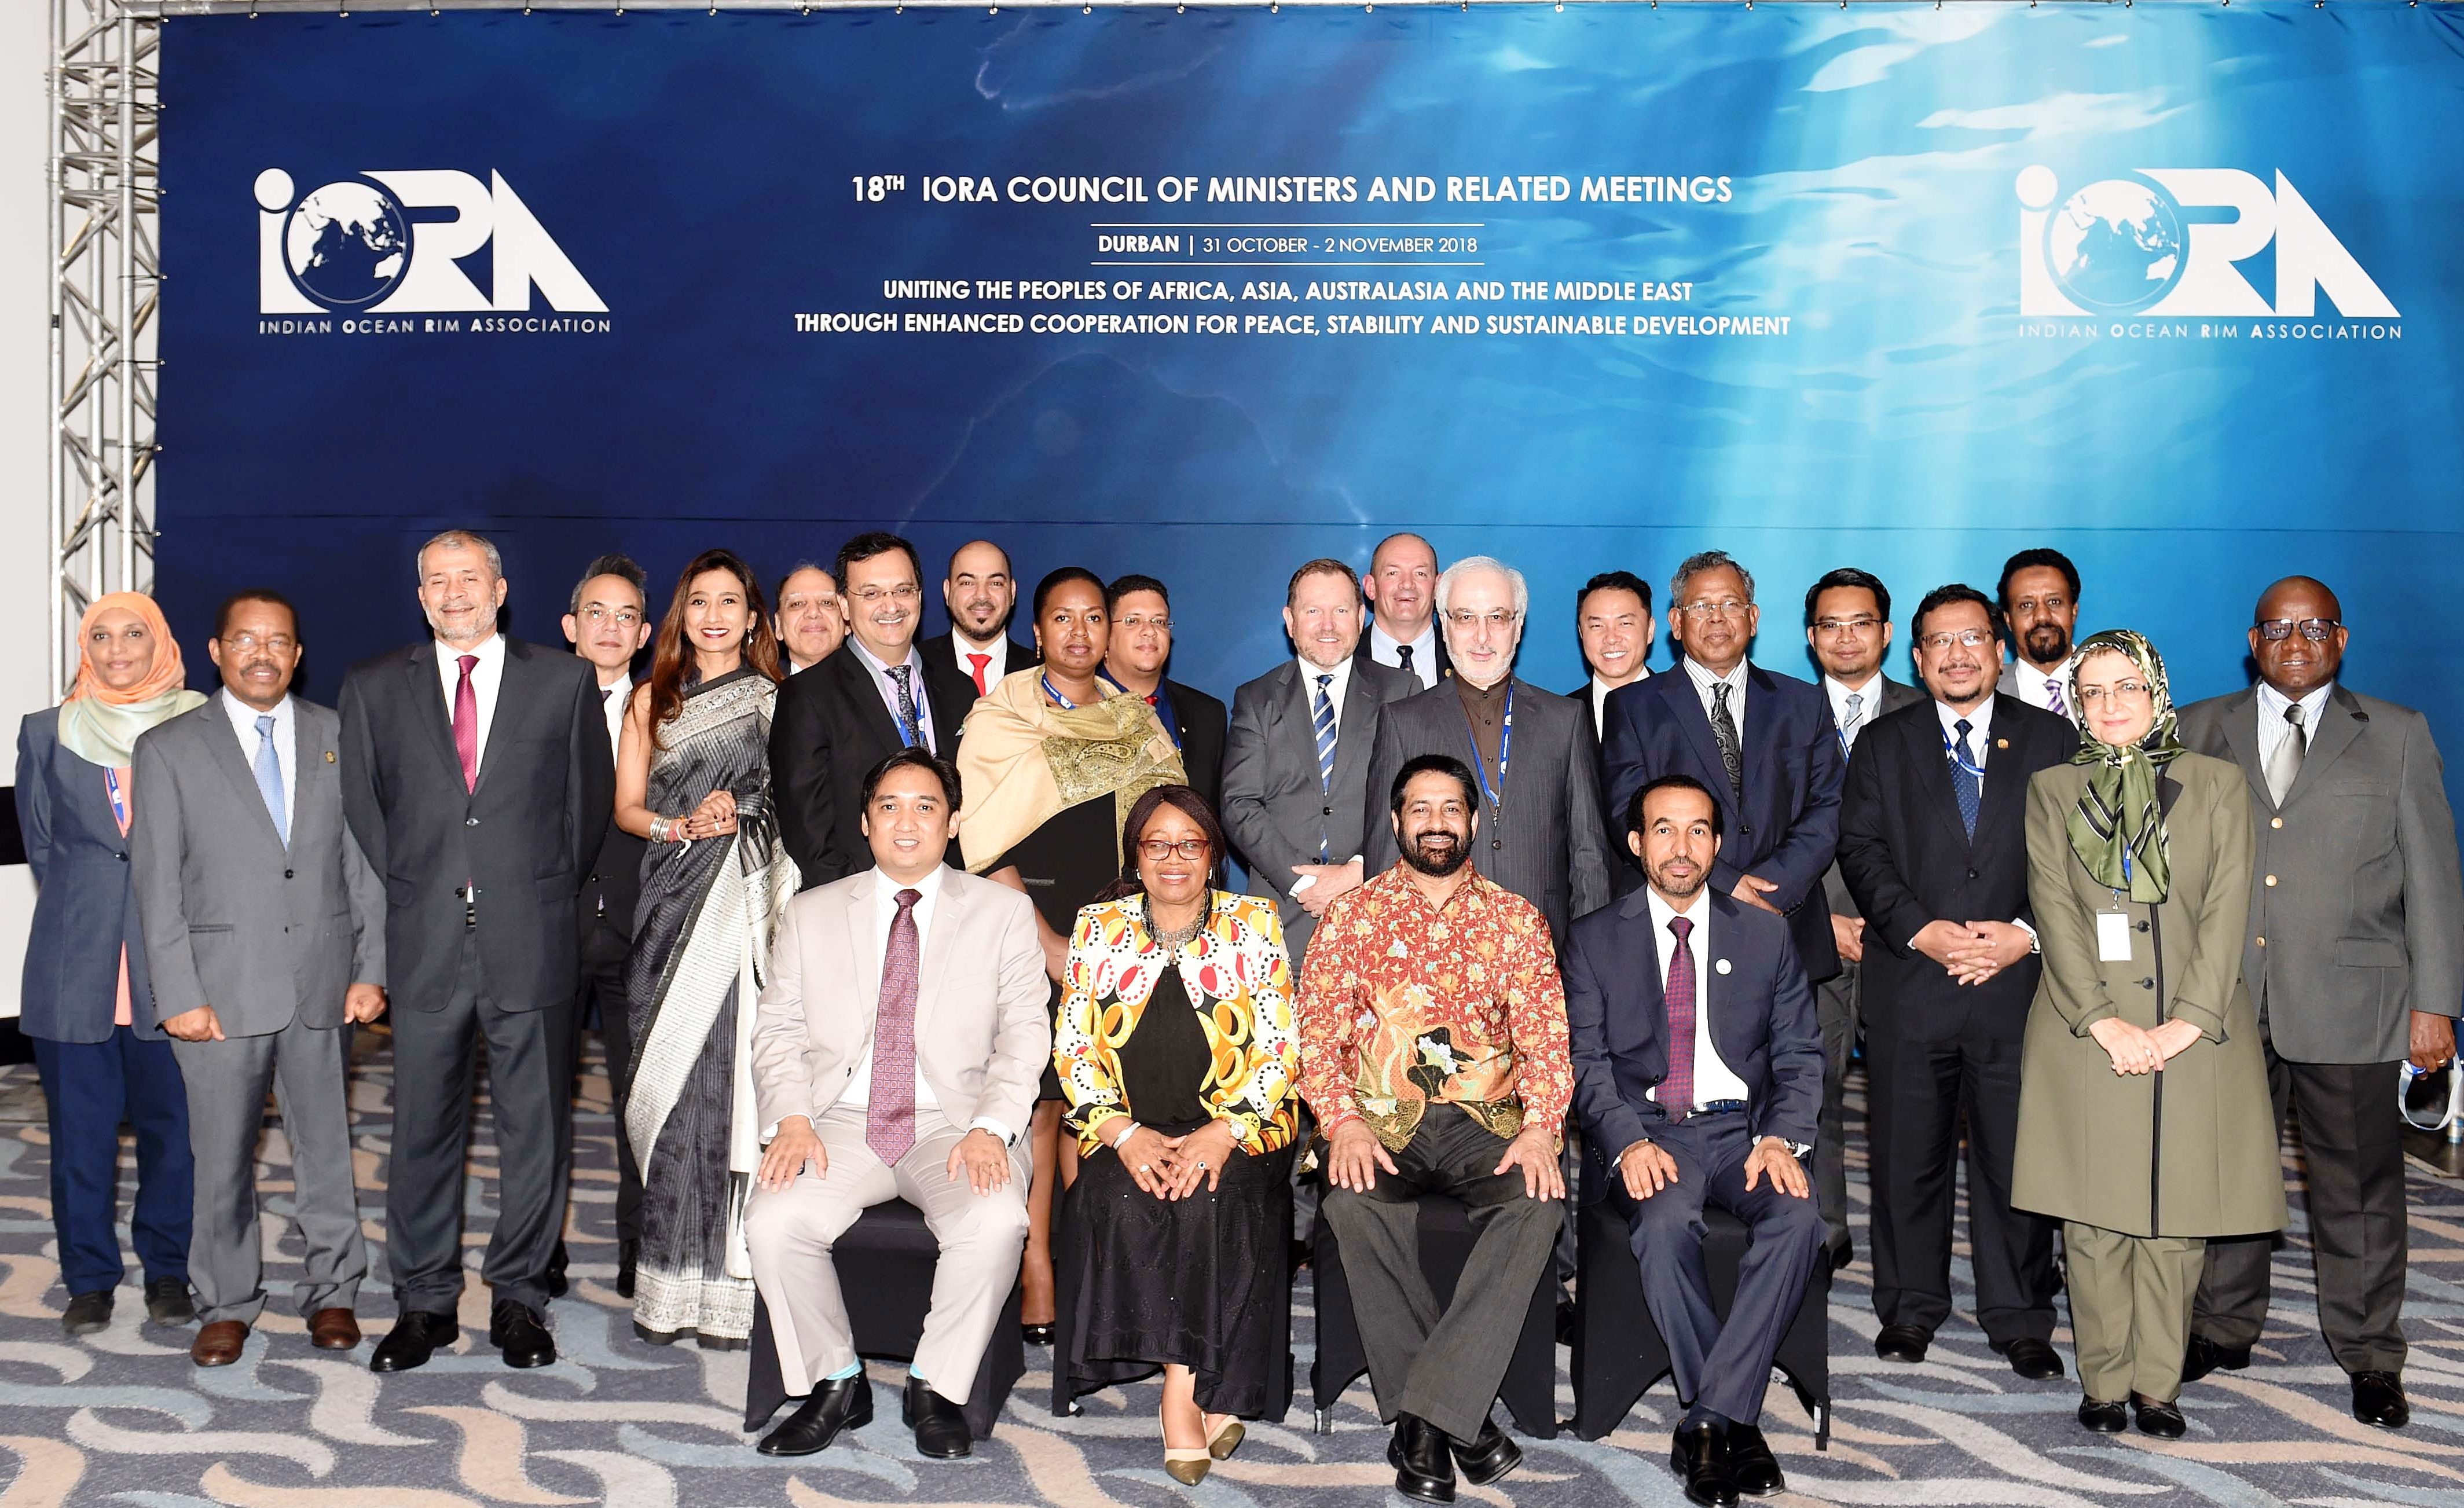 Indian Ocean Rim Association (IORA) Committee of Senior Officials meeting held at the Elangeni Hotel, Durban, South Africa. Prof Anil Sooklal opening the meeting with IORA Sec Gen Dr Nomvuyo N Nokwe. 31 October 2018 Picture byline: Jacoline Schoonees/DNS